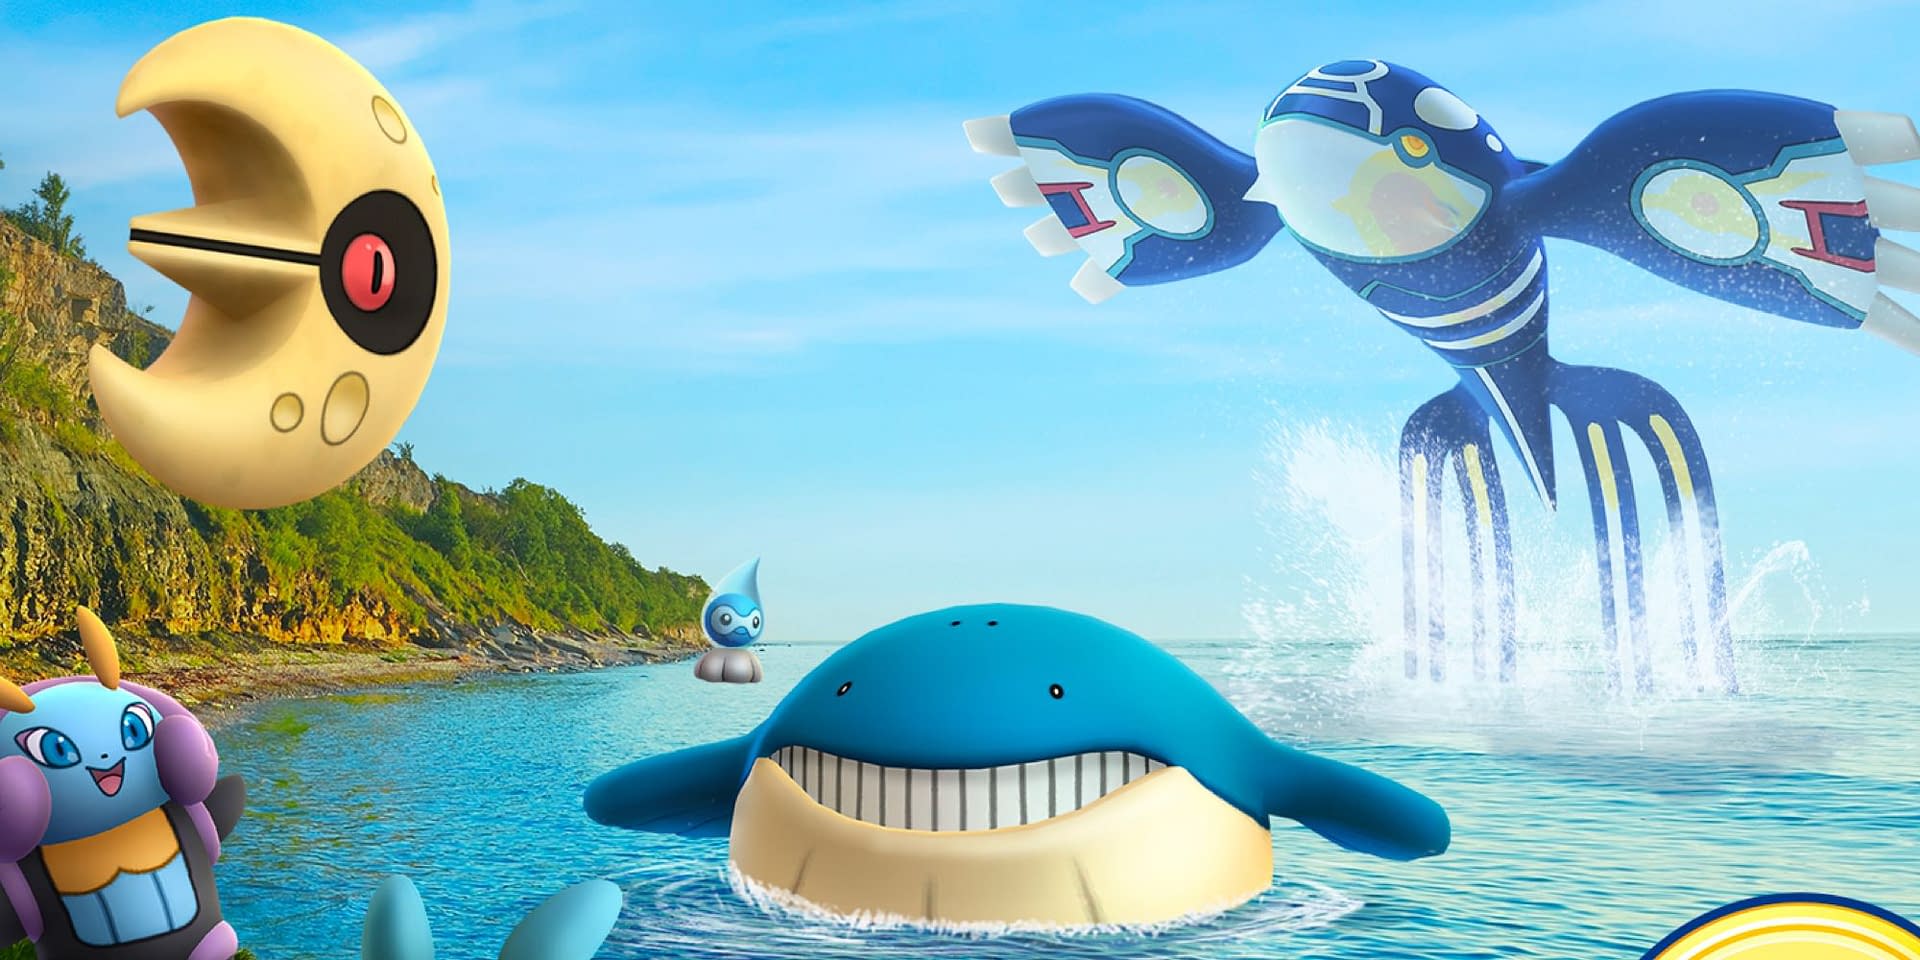 Can Kyogre and Groudon be shiny in Pokemon GO? (February 2023)